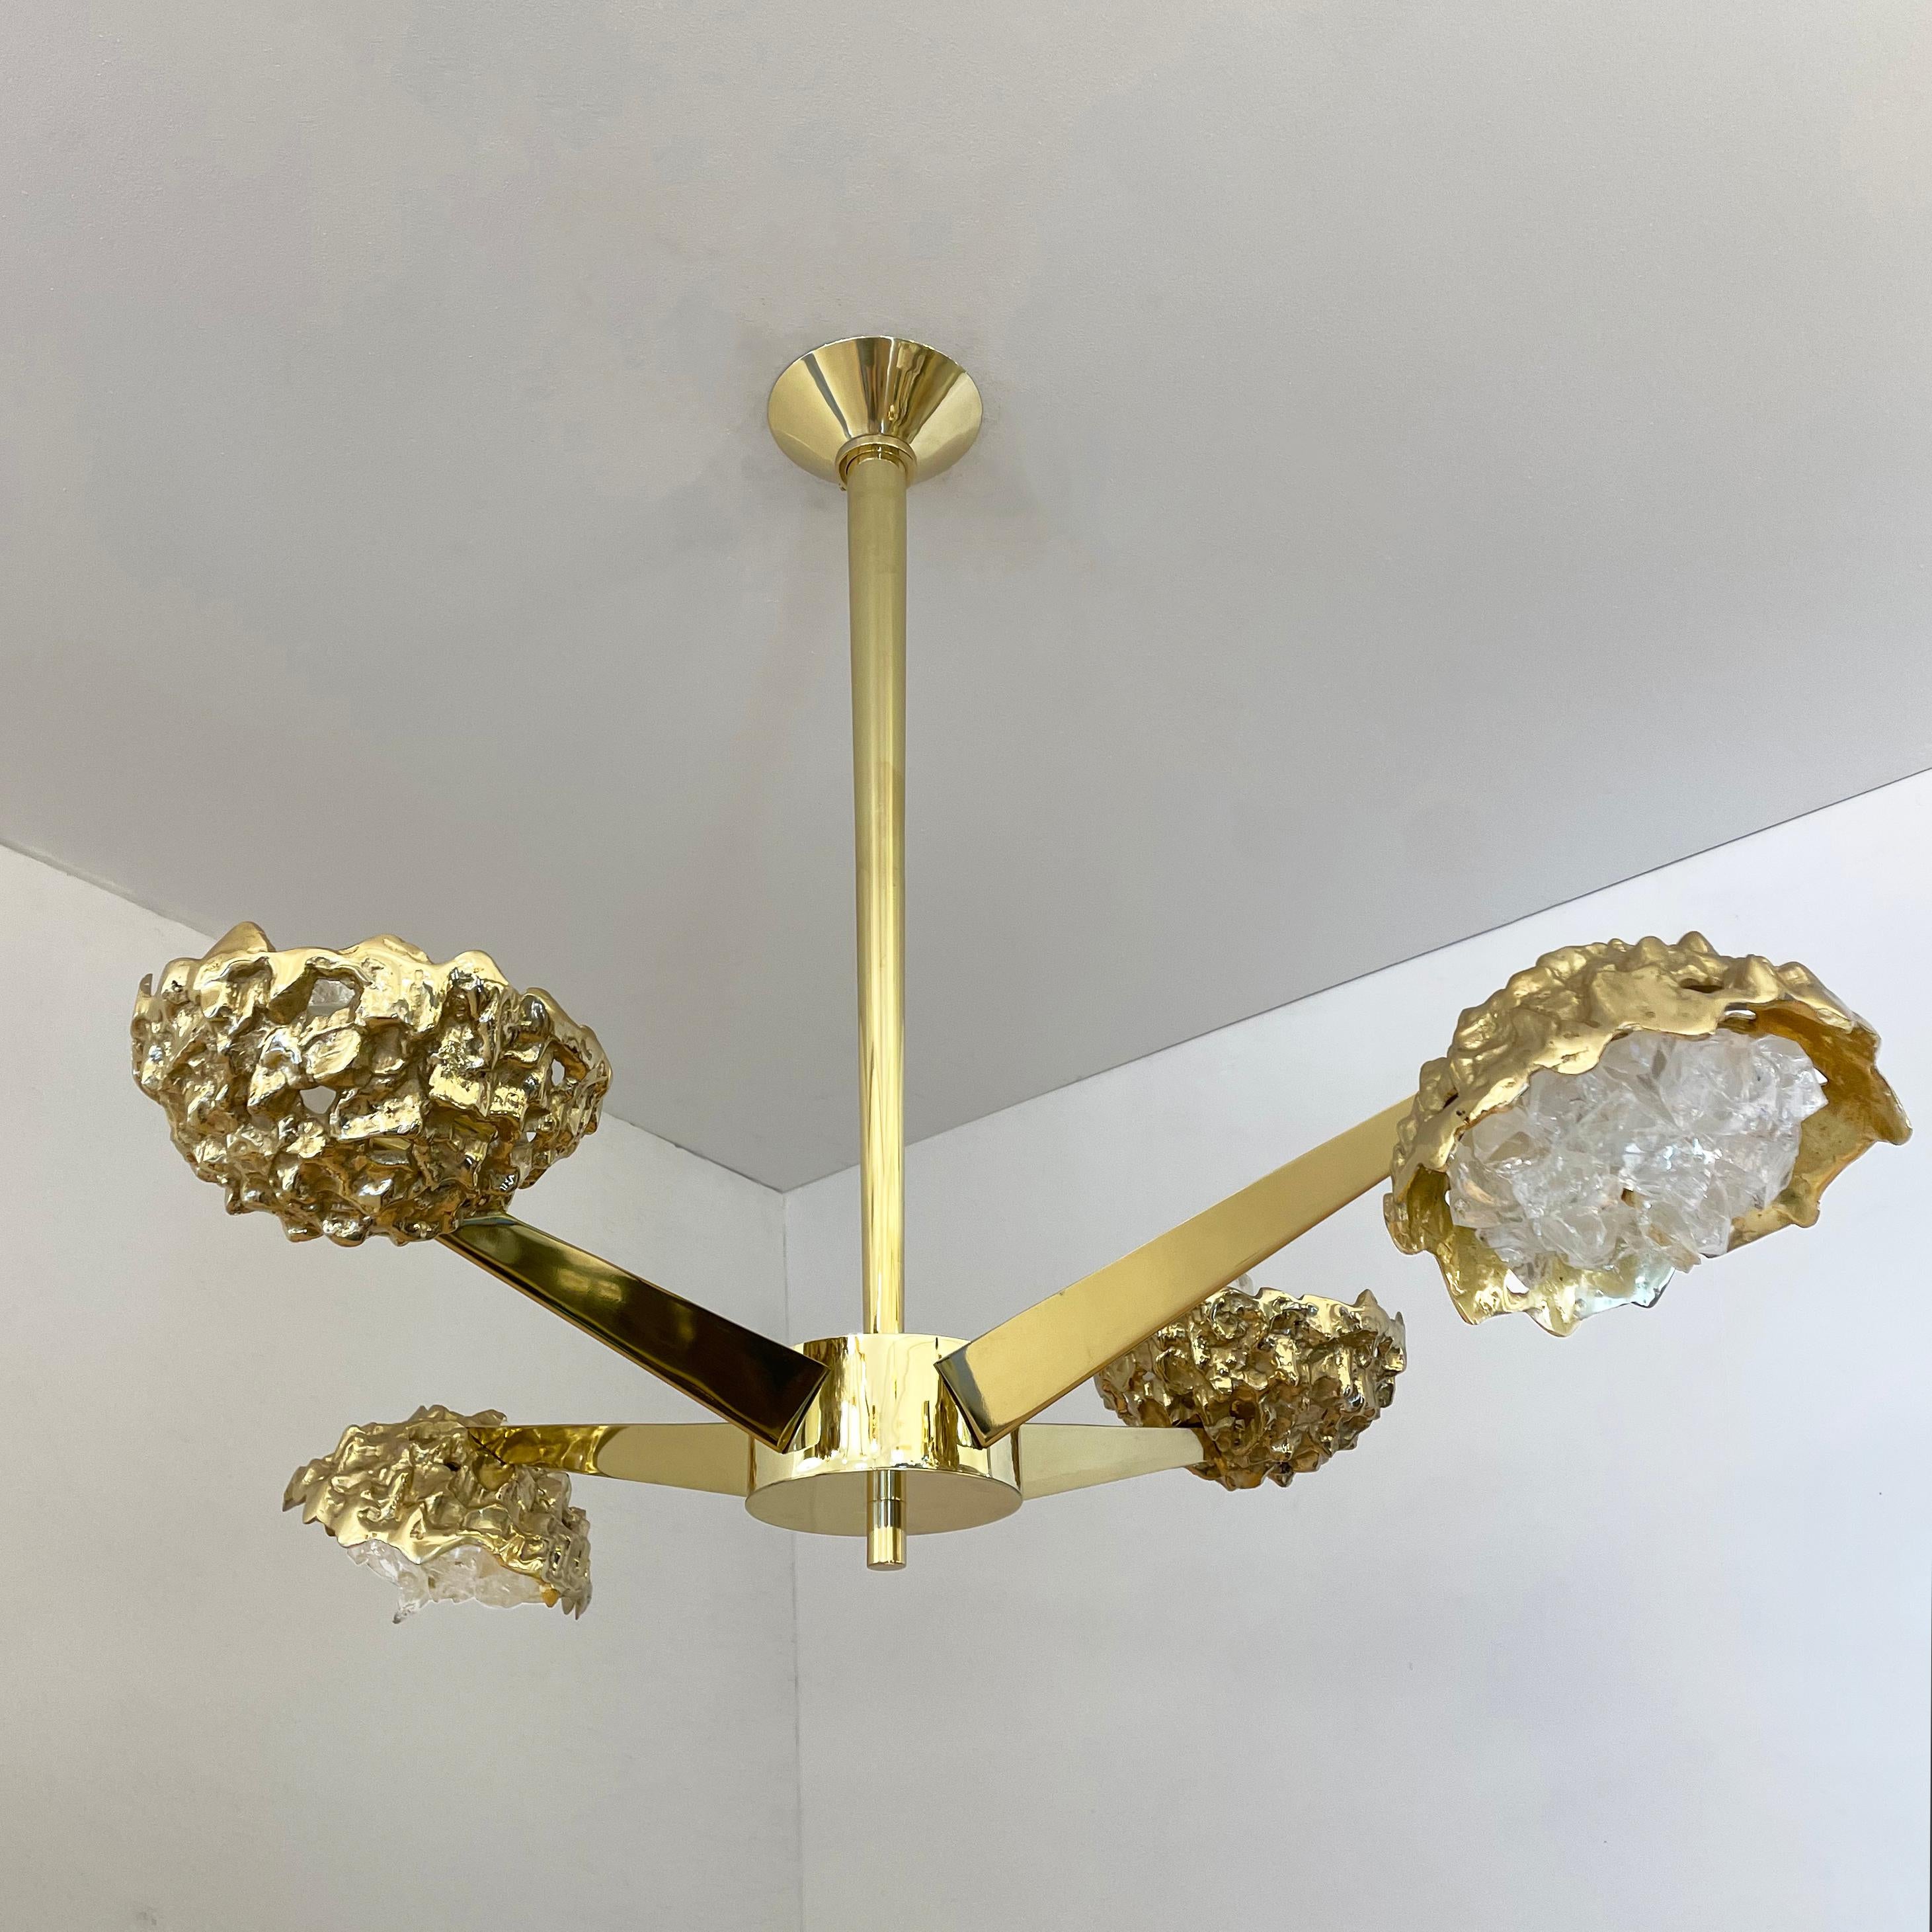 Italian Fusione N.4 Ceiling Light by Gaspare Asaro For Sale